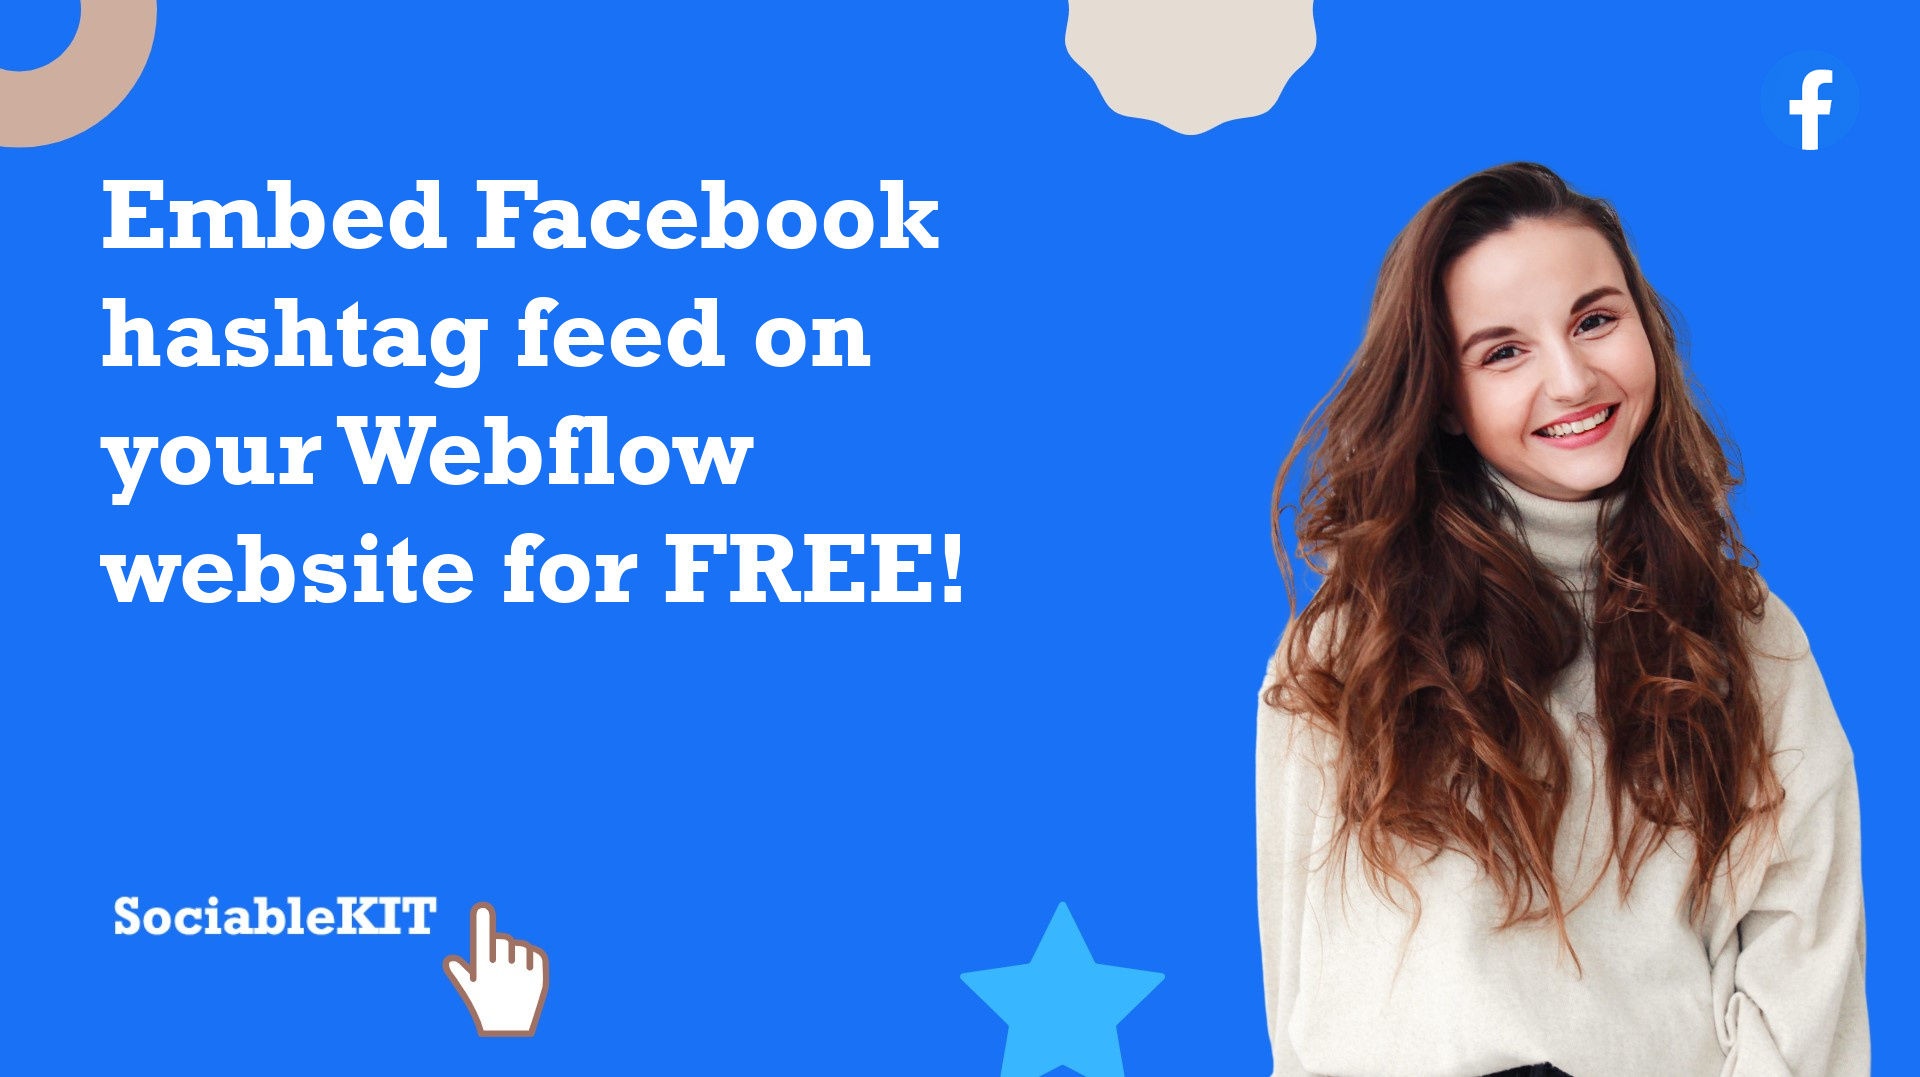 How to embed Facebook hashtag feed on your Webflow website for FREE?